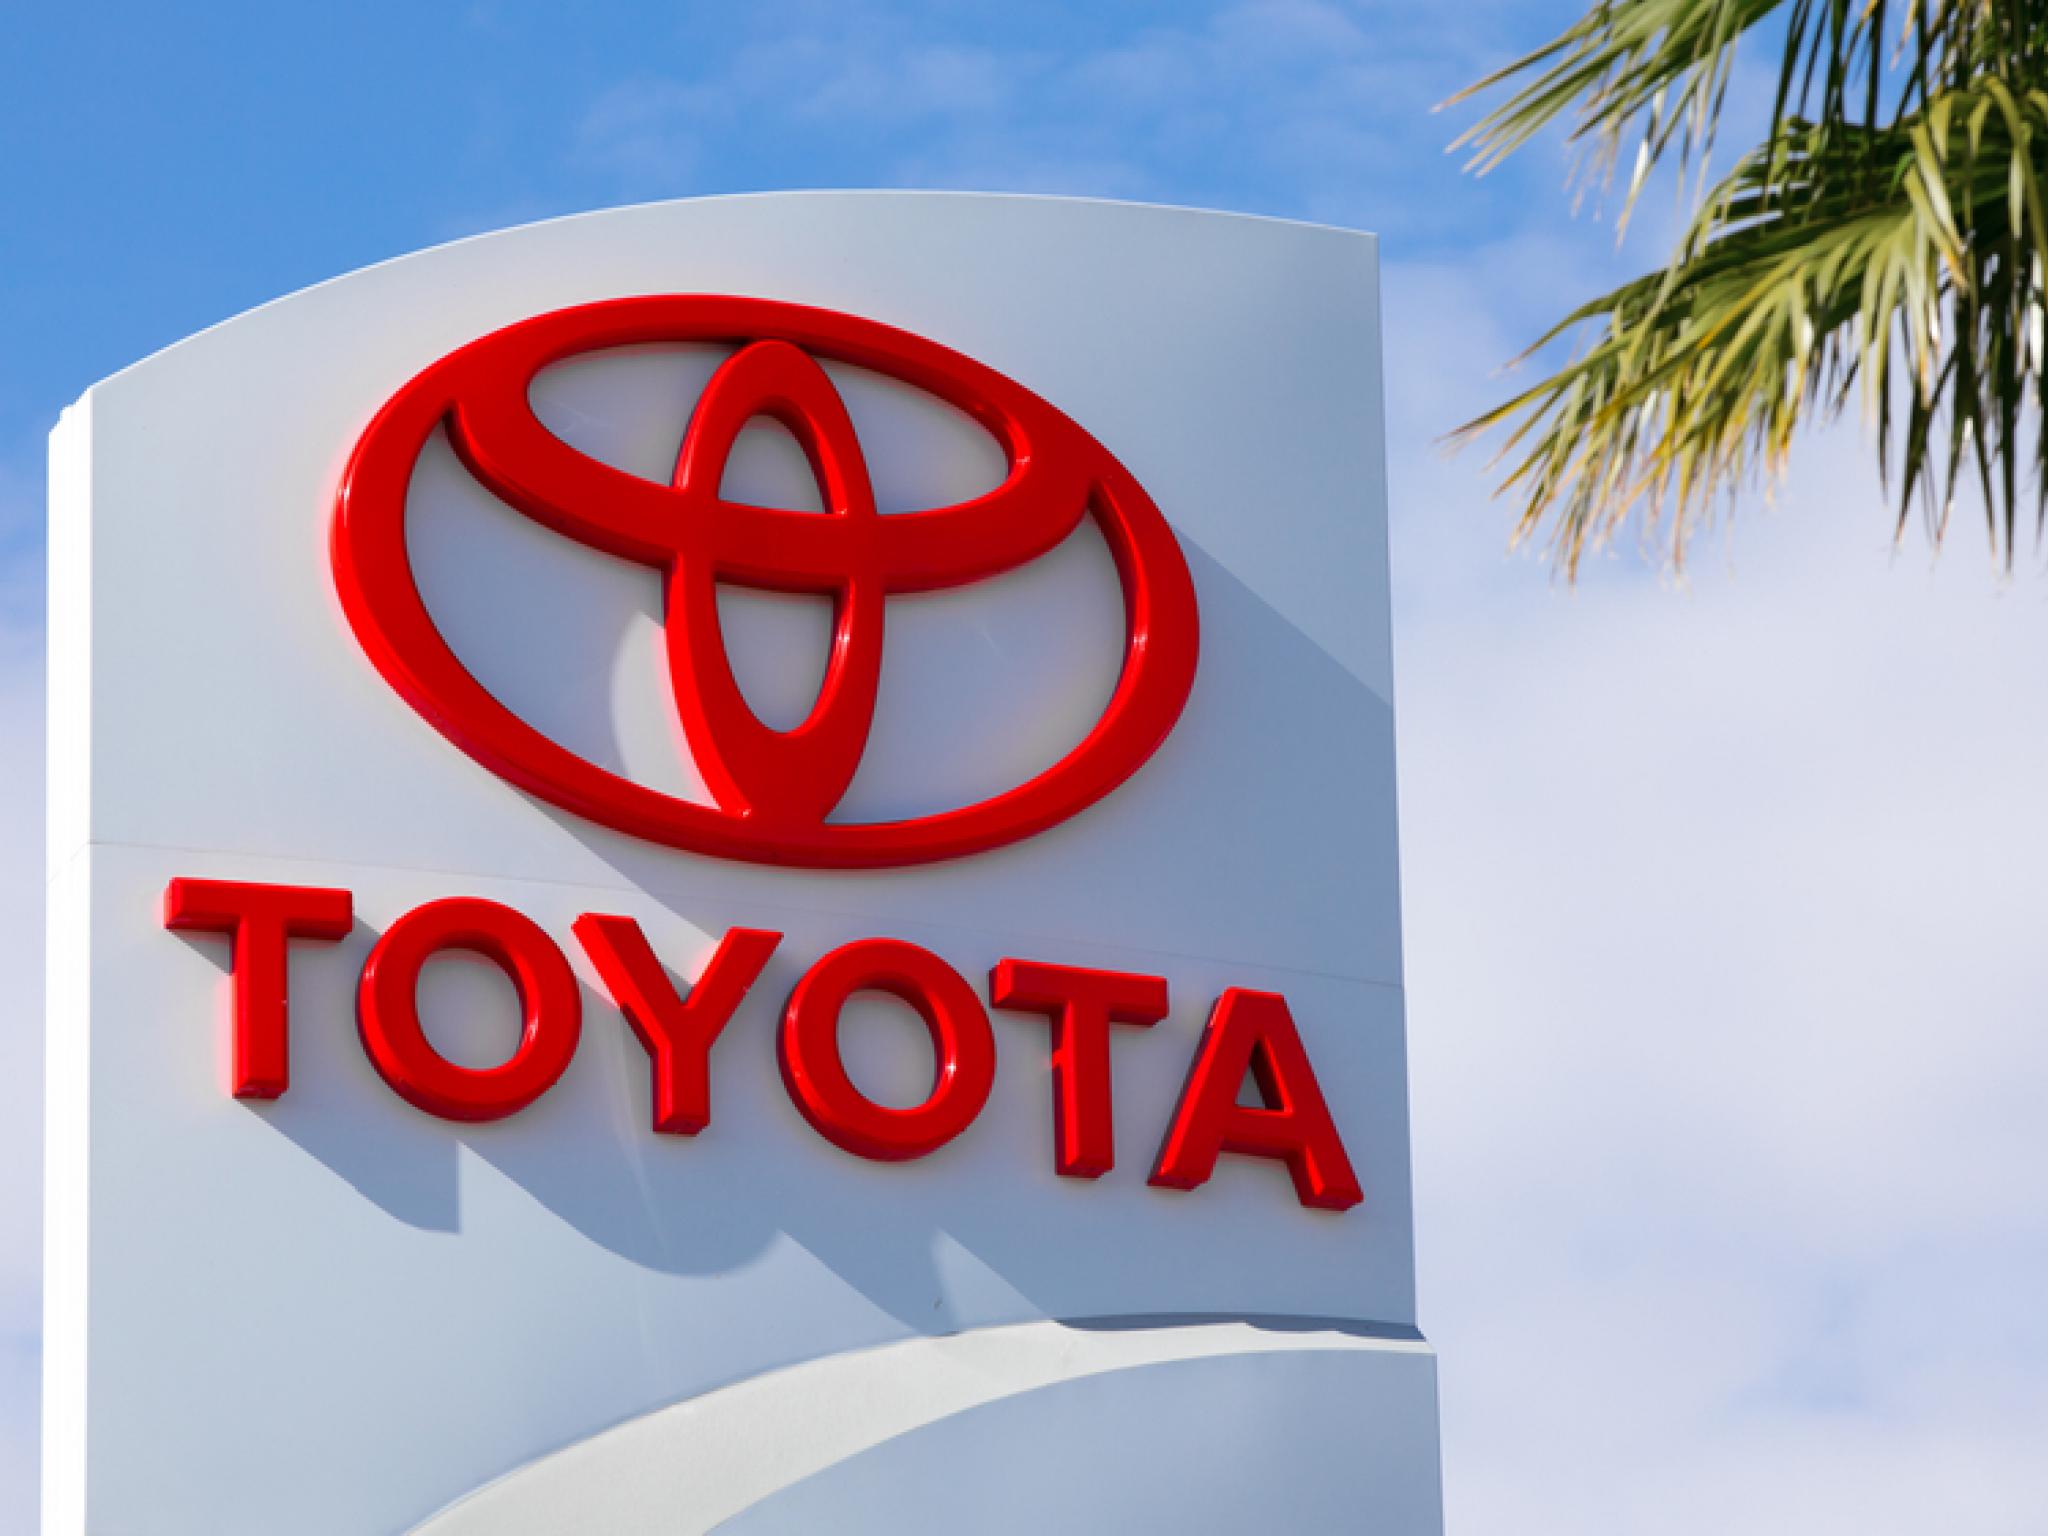  whats-going-on-with-toyota-shares-after-revealing-14b-investment-at-princeton-facility-for-making-electric-suvs 